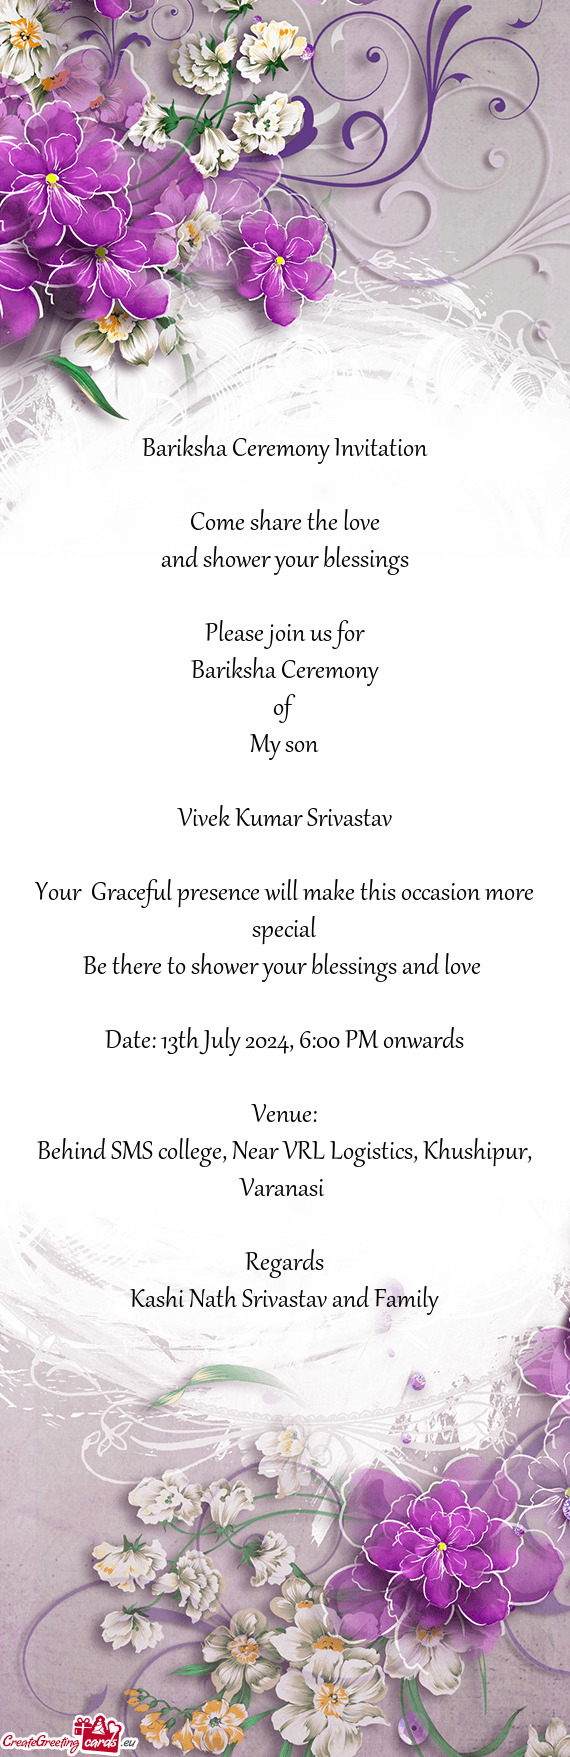 Date: 13th July 2024, 6:00 PM onwards